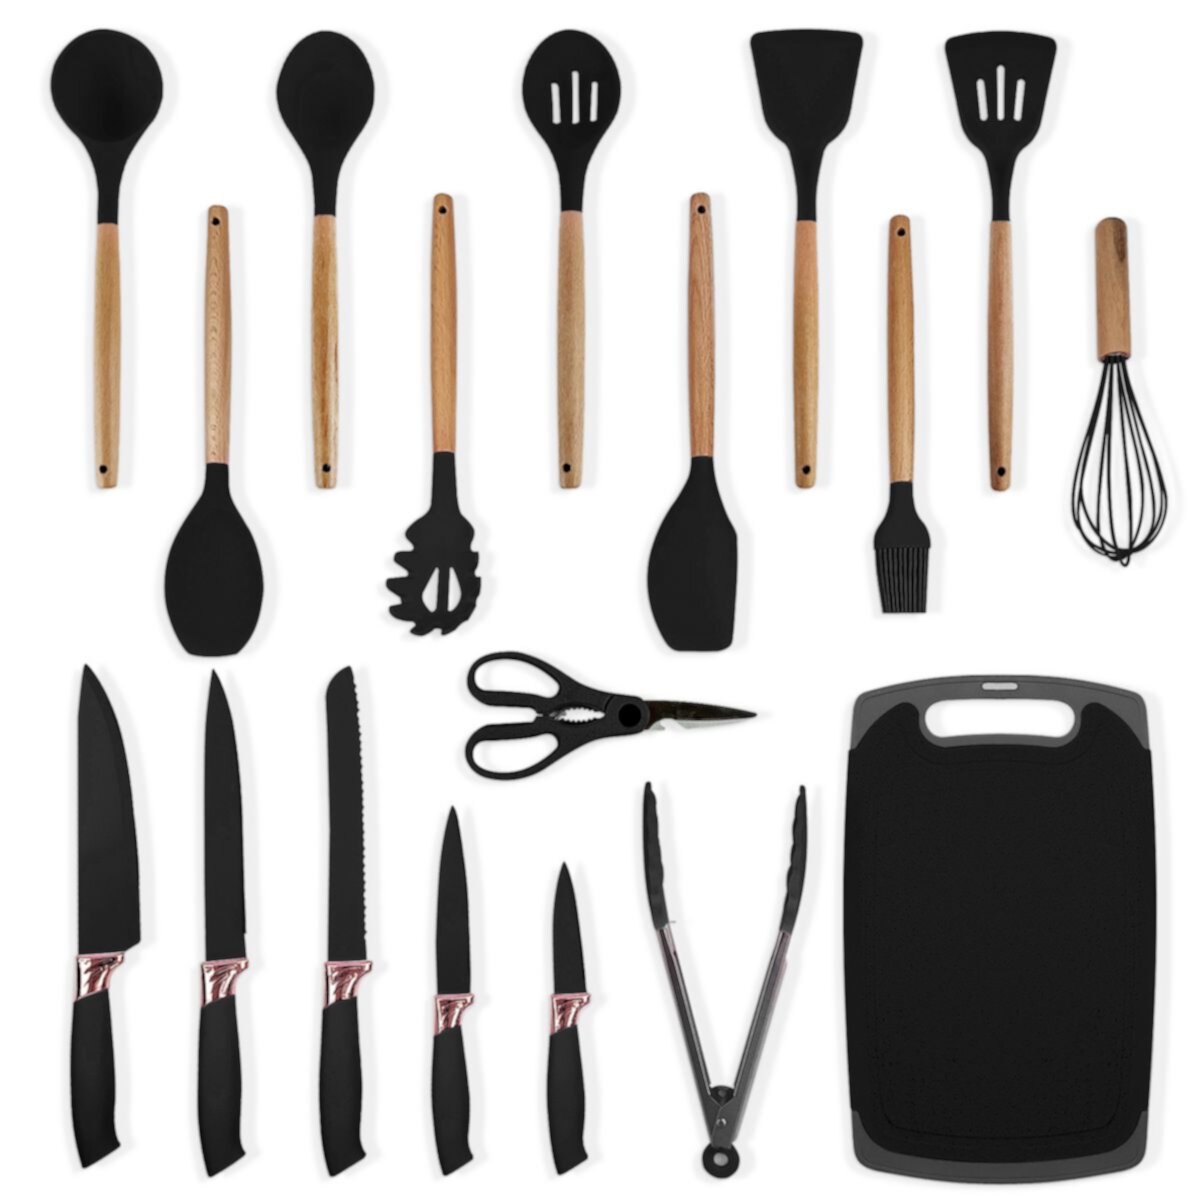 Silicone Cooking Utensils Set - Heat Resistant Kitchen Utensils, 19 Pieces Kitchen Utensil Set Mega Casa